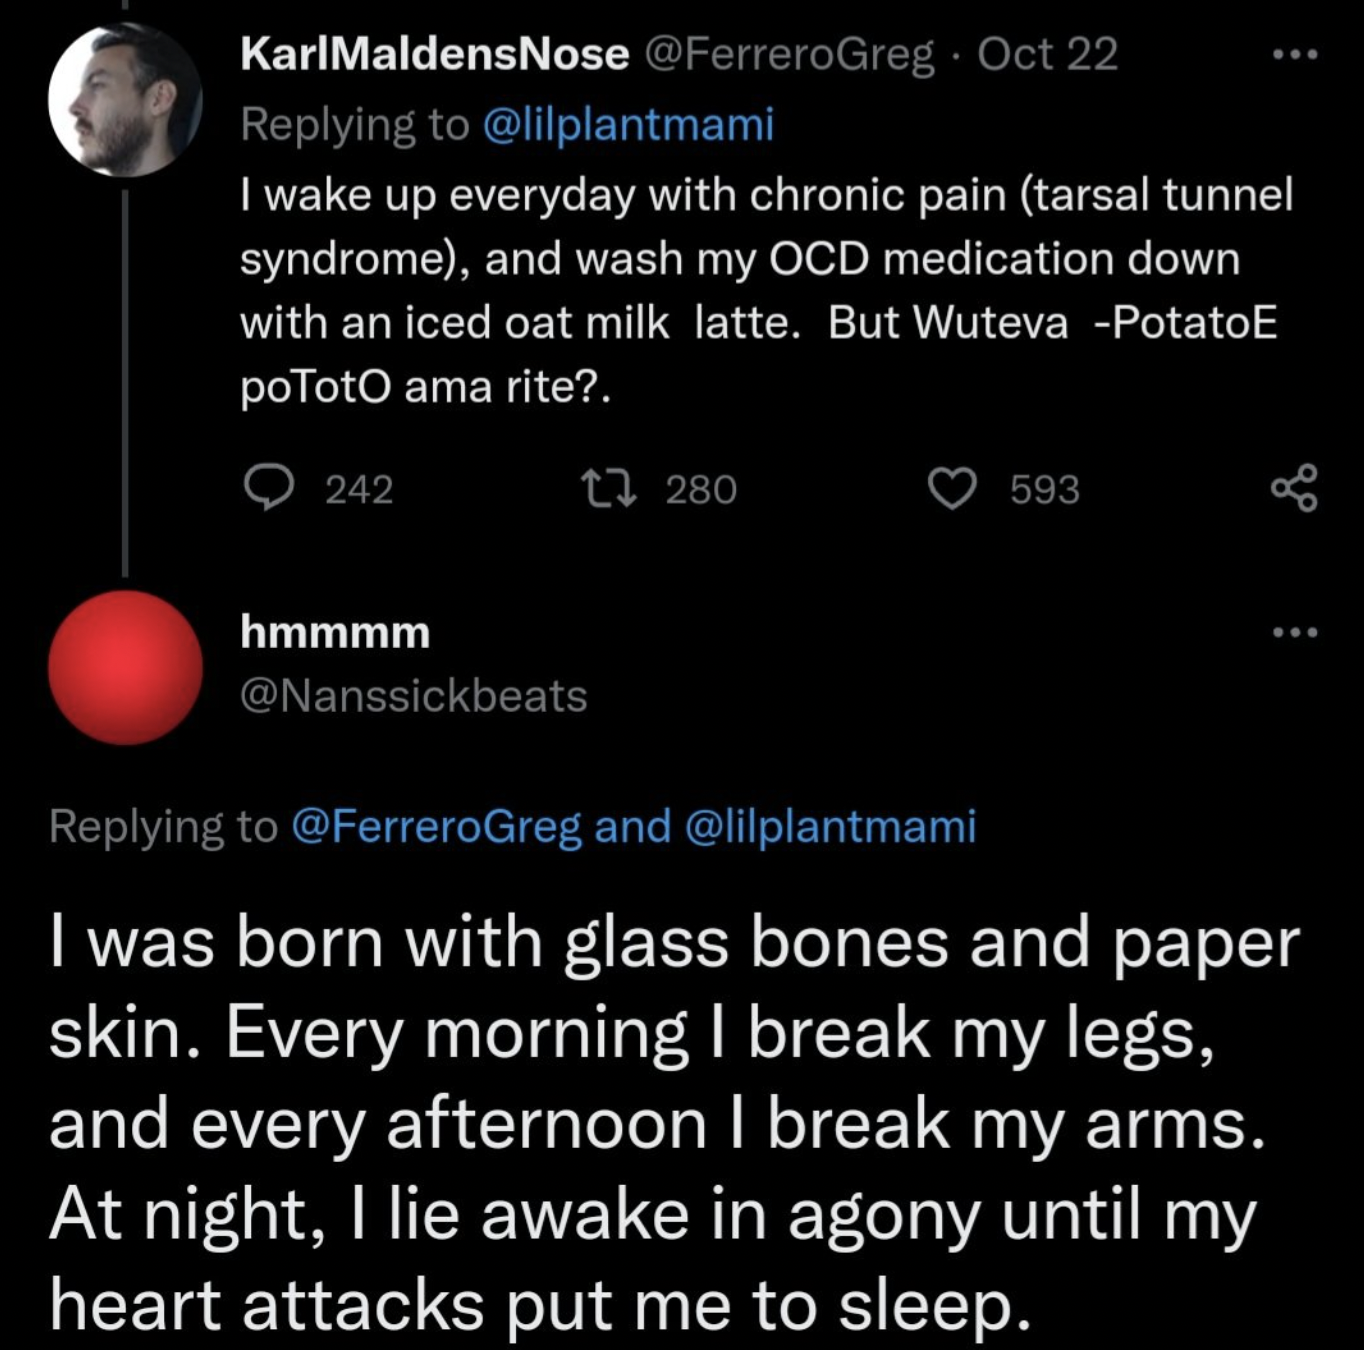 twitter hot takes 2022 - atmosphere - I wake up everyday with chronic pain tarsal tunnel syndrome, and wash my Ocd medication down with an iced oat milk latte. But Wuteva PotatoE poToto ama rite?. 242 1280 hmmmm 593 ... and I was born with glass bones and